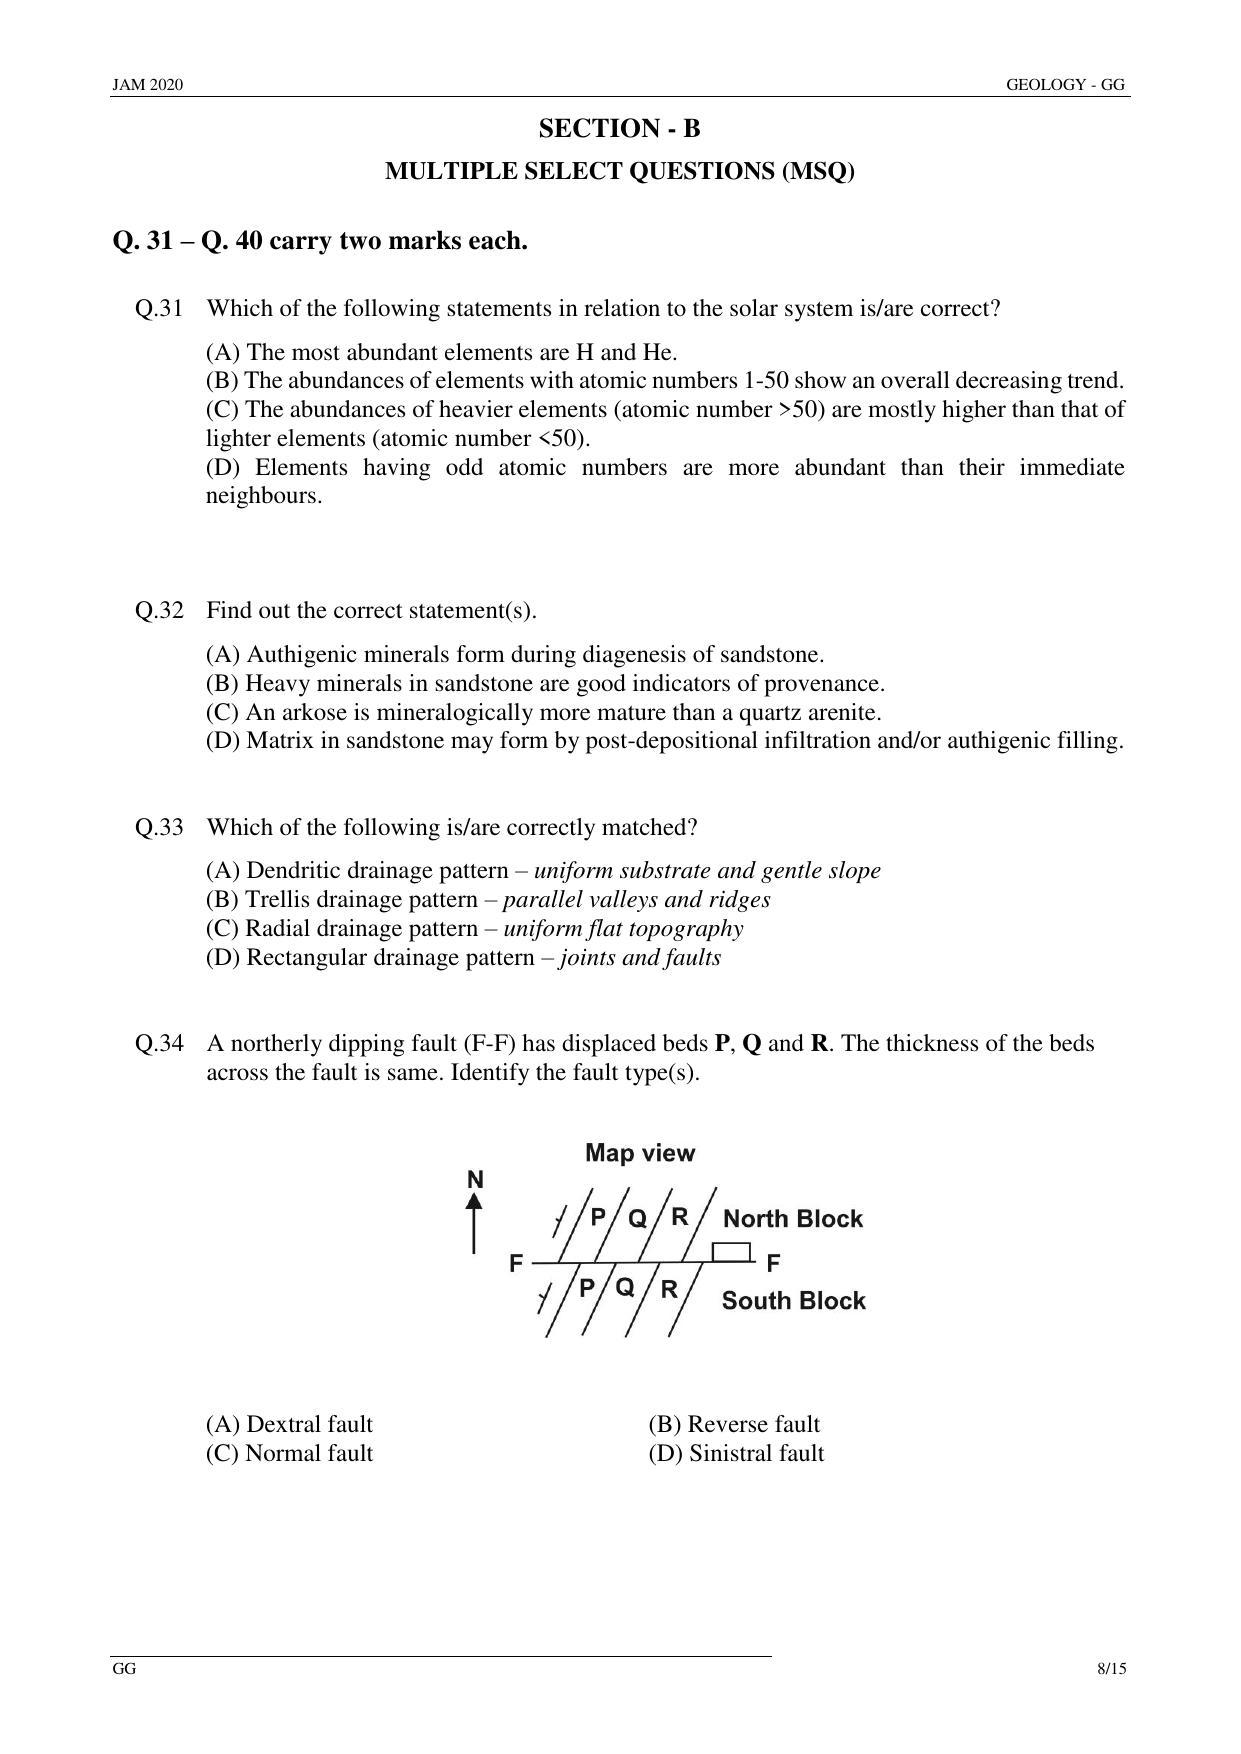 JAM 2020: GG Question Paper - Page 8